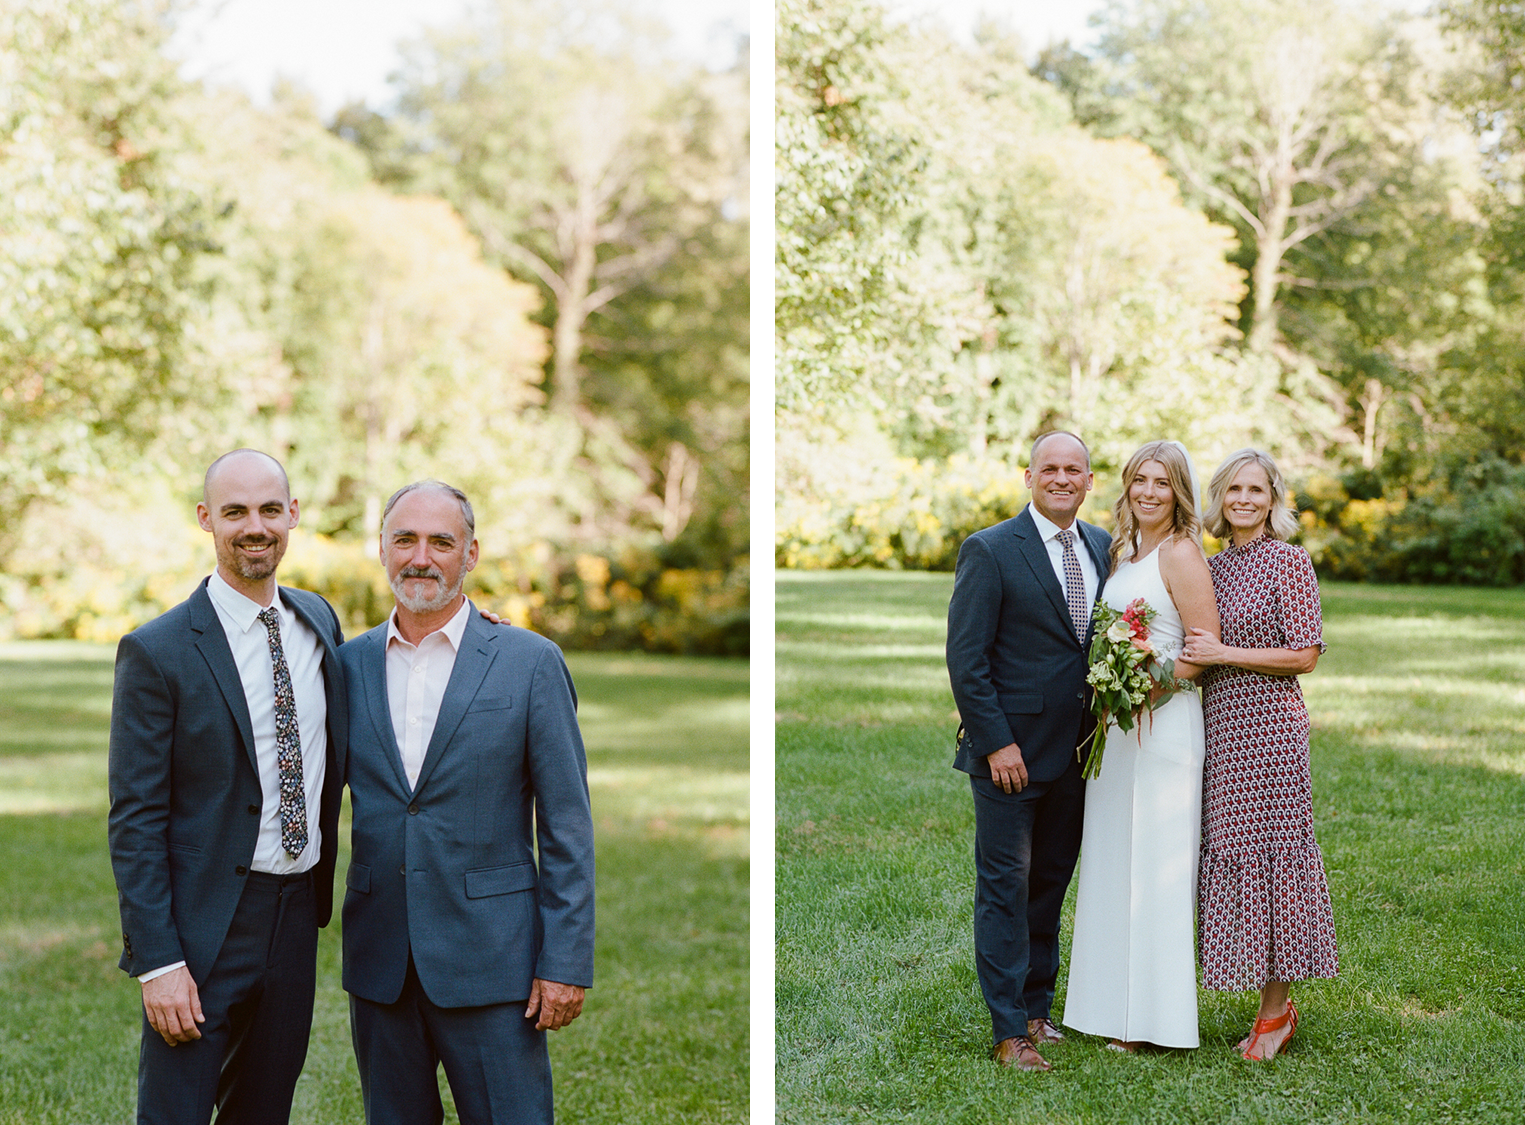 Backyard-Elopement-on-Film-Analog-Pool-Party-85.PNG